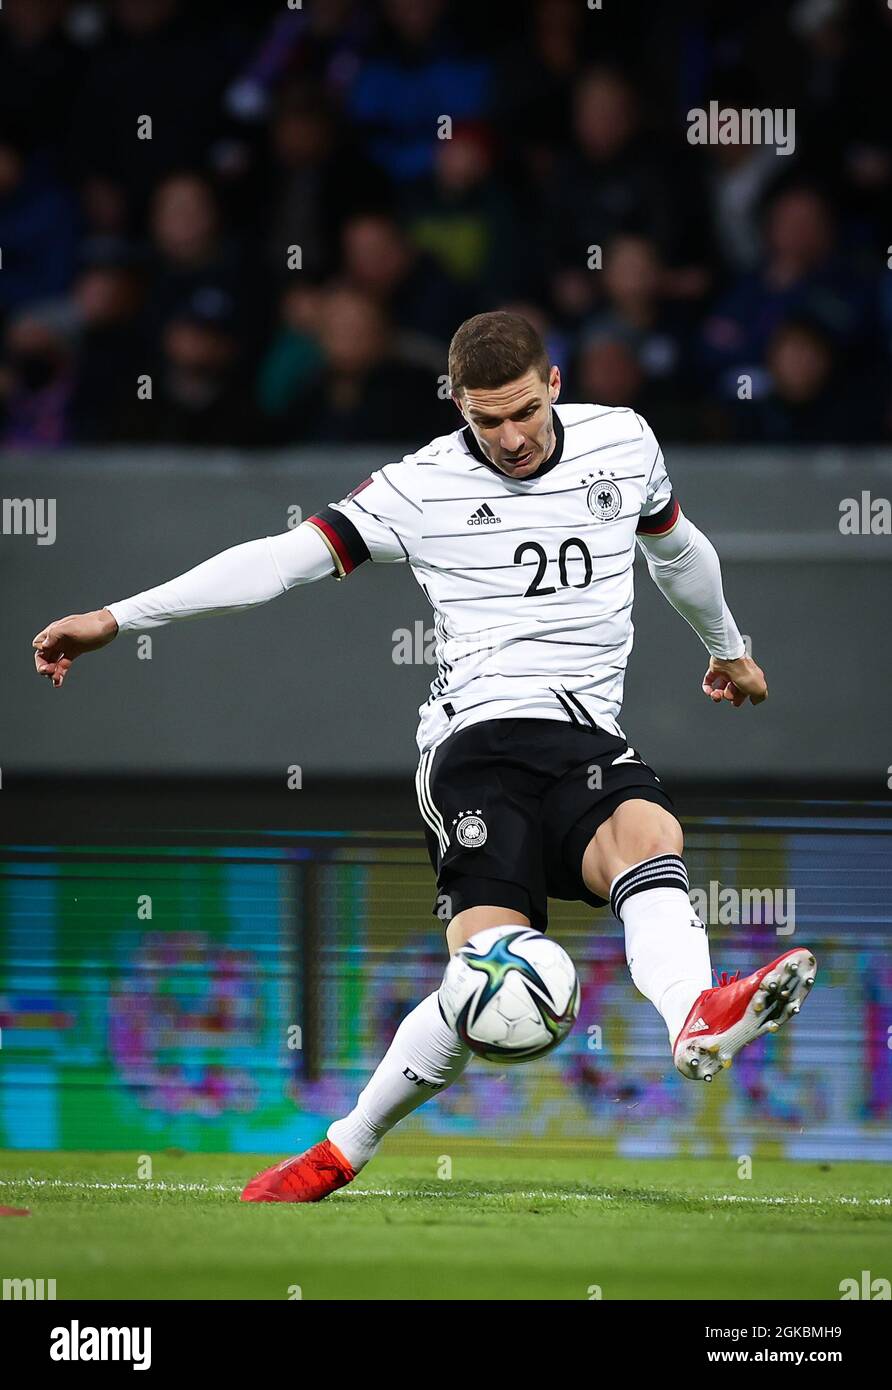 Reykjavik, Iceland. 08th Sep, 2021. Football: World Cup qualifying, Iceland - Germany, Group stage, Group J, Matchday 6 at Laugardalsvöllur stadium. Robin Gosens from Germany plays the ball. Credit: Christian Charisius/dpa/Alamy Live News Stock Photo